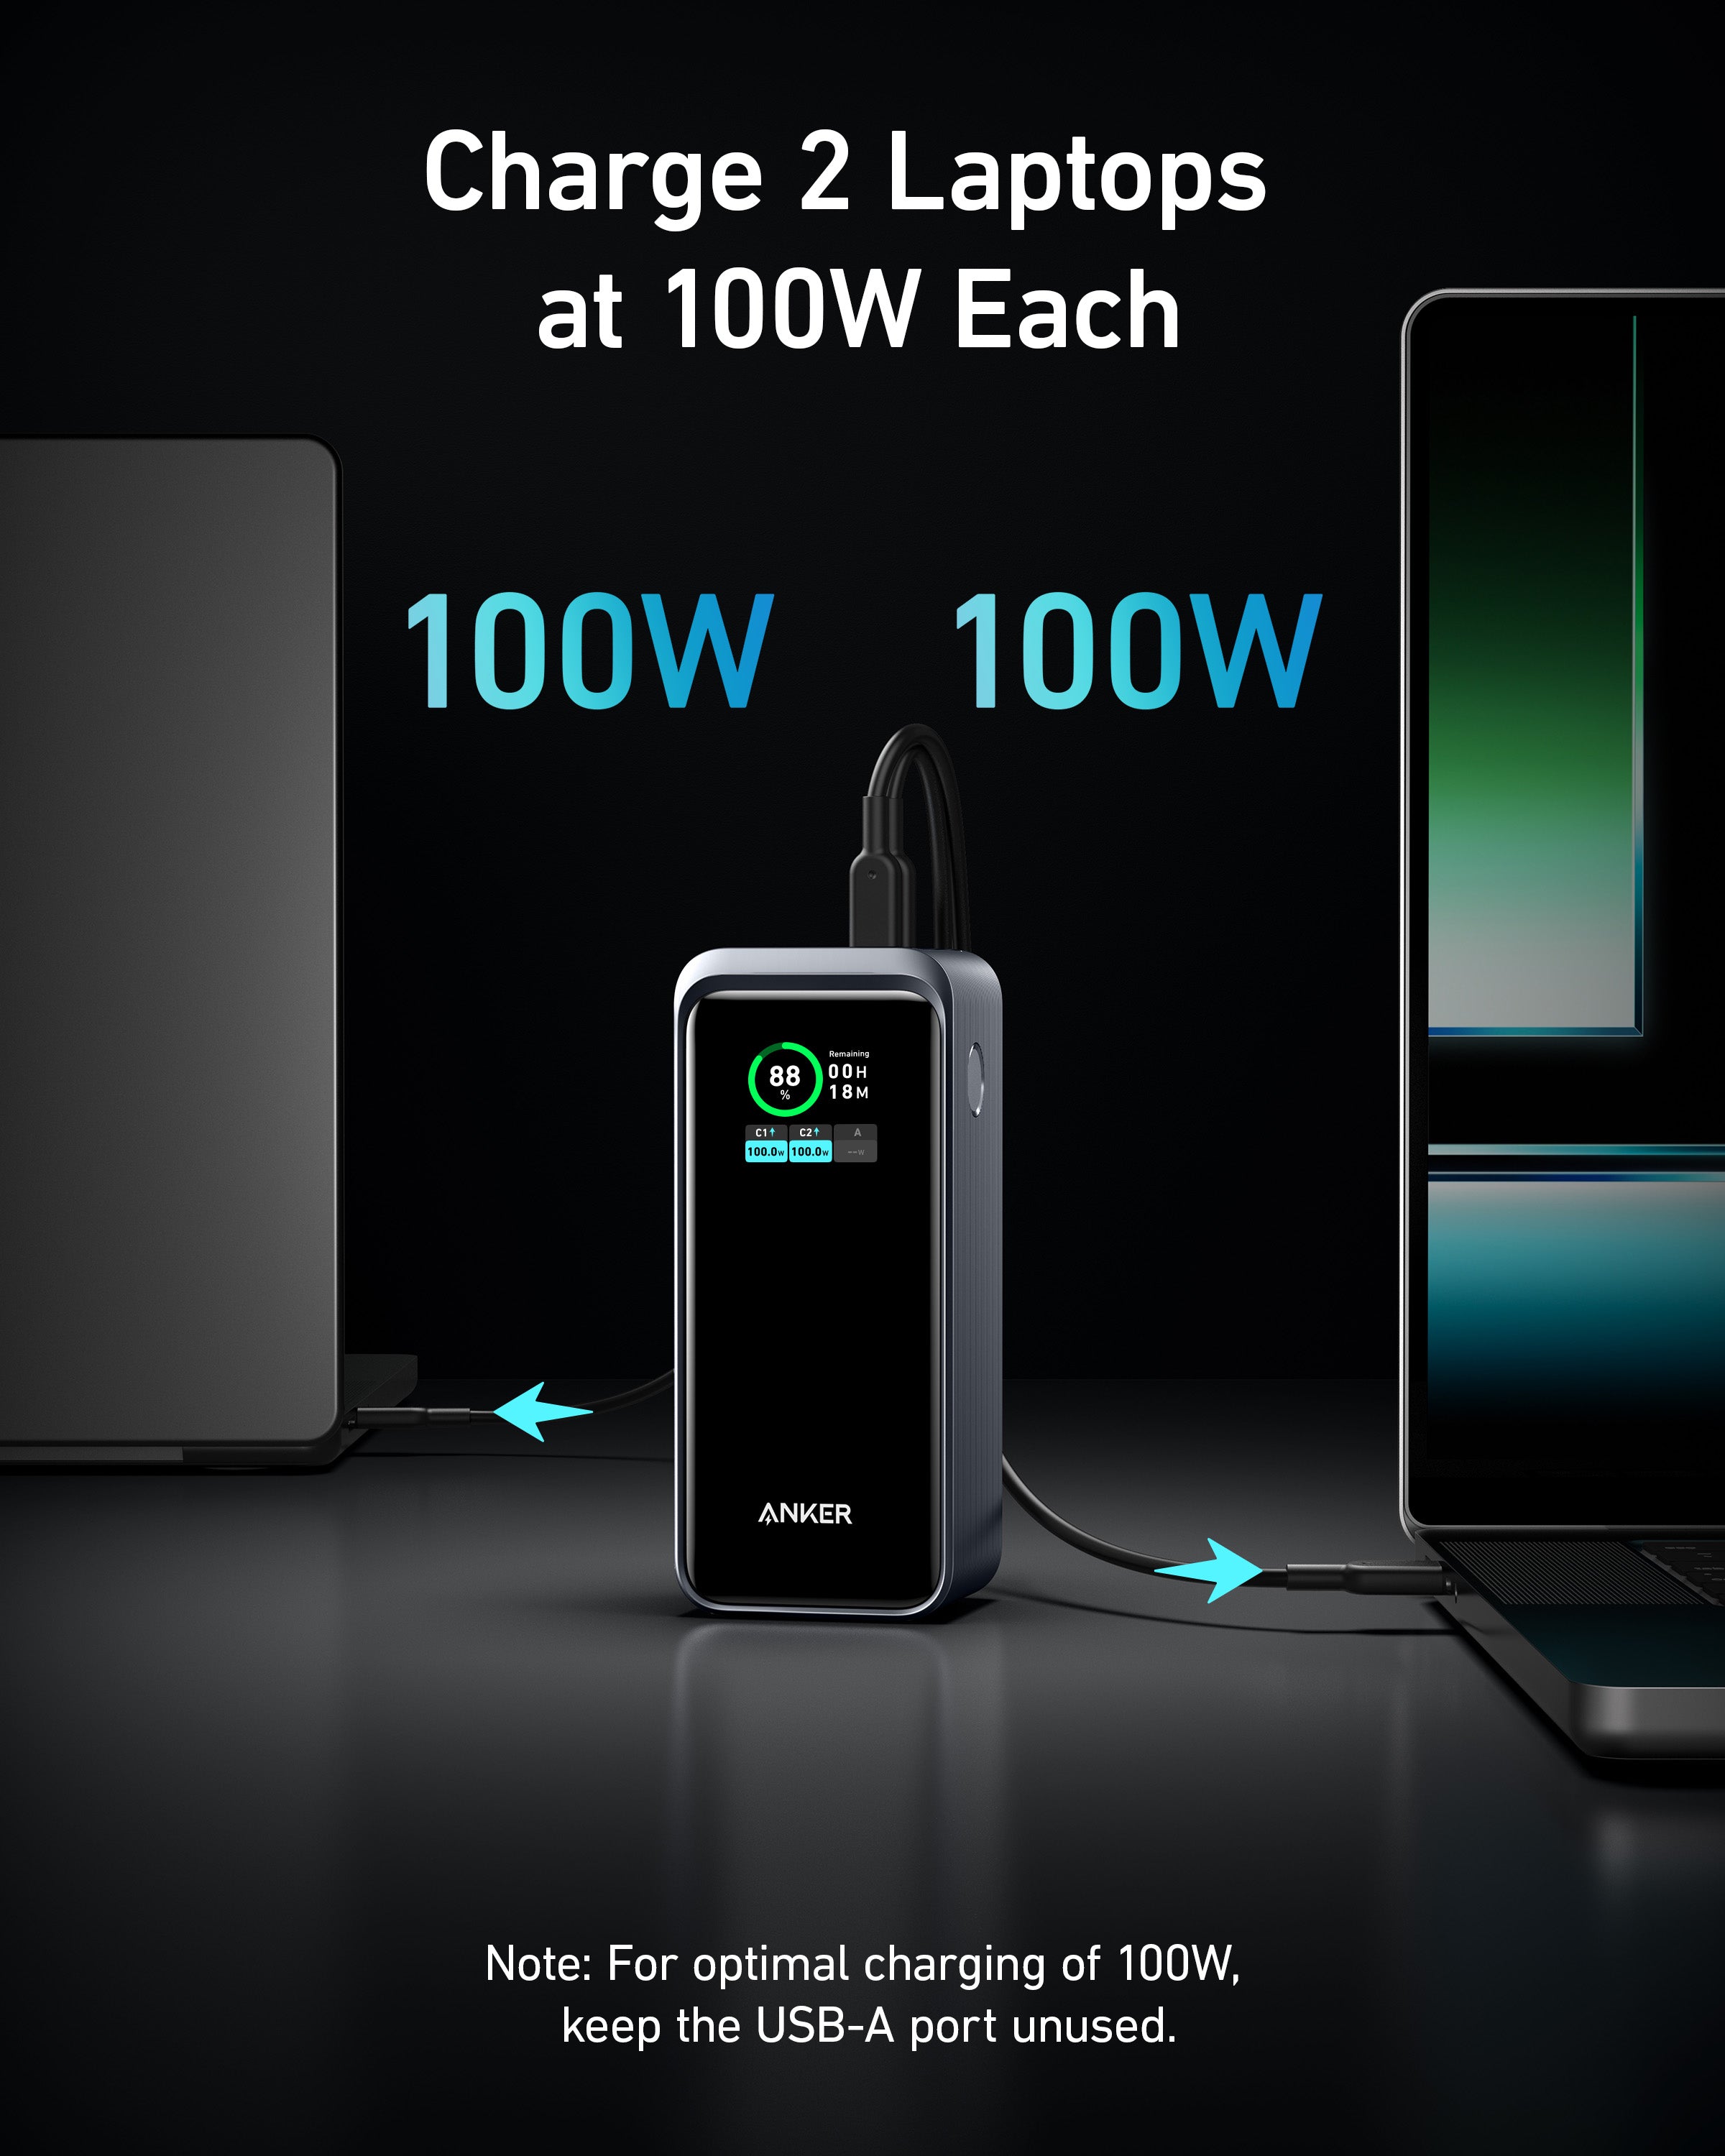 Anker Prime Power Bank, 20,000mAh Portable Charger with 200W Output, Smart  Digital Display Charging Base, 100W Fast Charging with 4 Ports, for MacBoo,  iPhone, Samsung, AirPods, and More